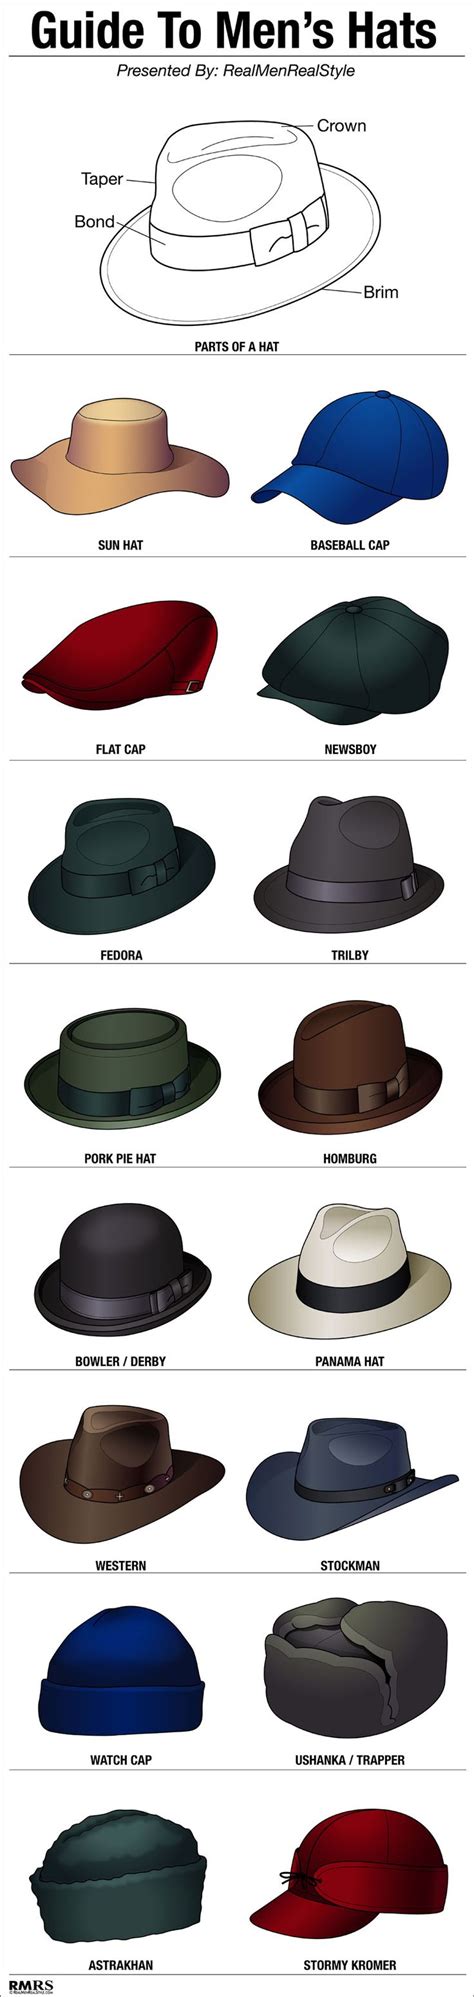 16 Stylish Mens Hats Hat Style Guide Mans Headwear Infographic Hats For Men Mens Style